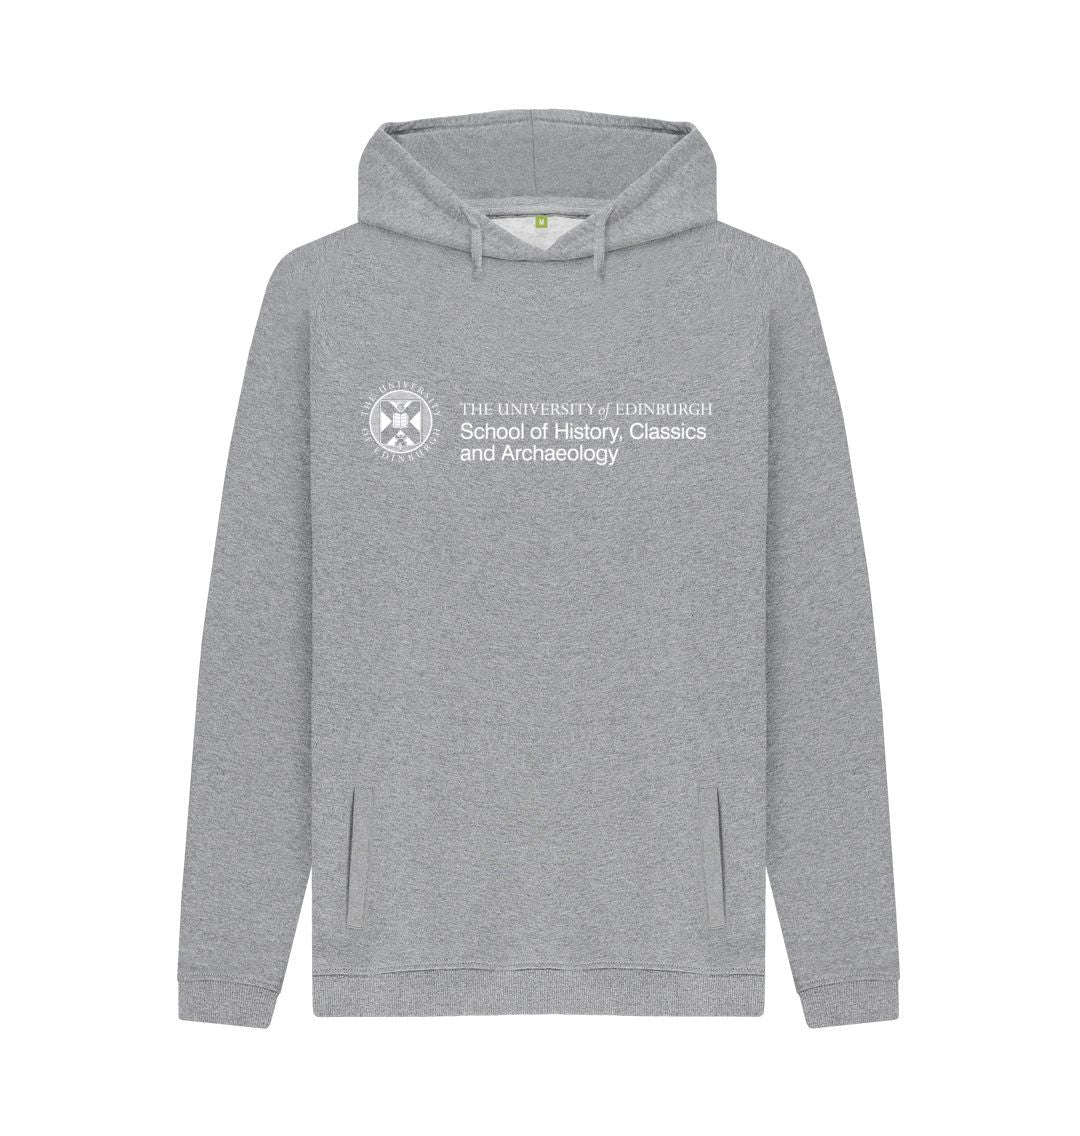 Light Heather School of History, Classics and Archaeology Hoodie